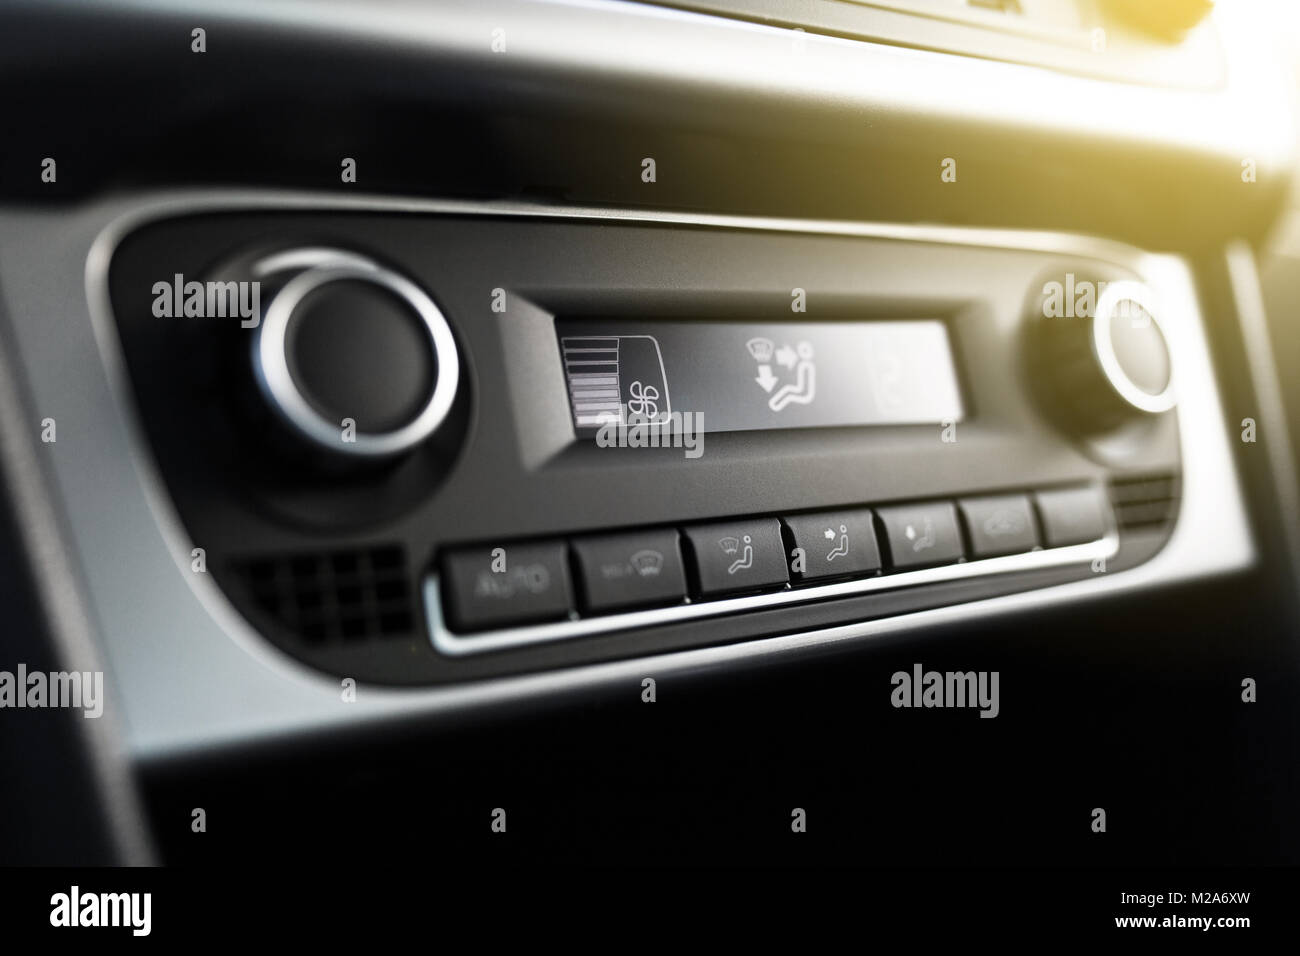 Air conditioning system in a car Stock Photo